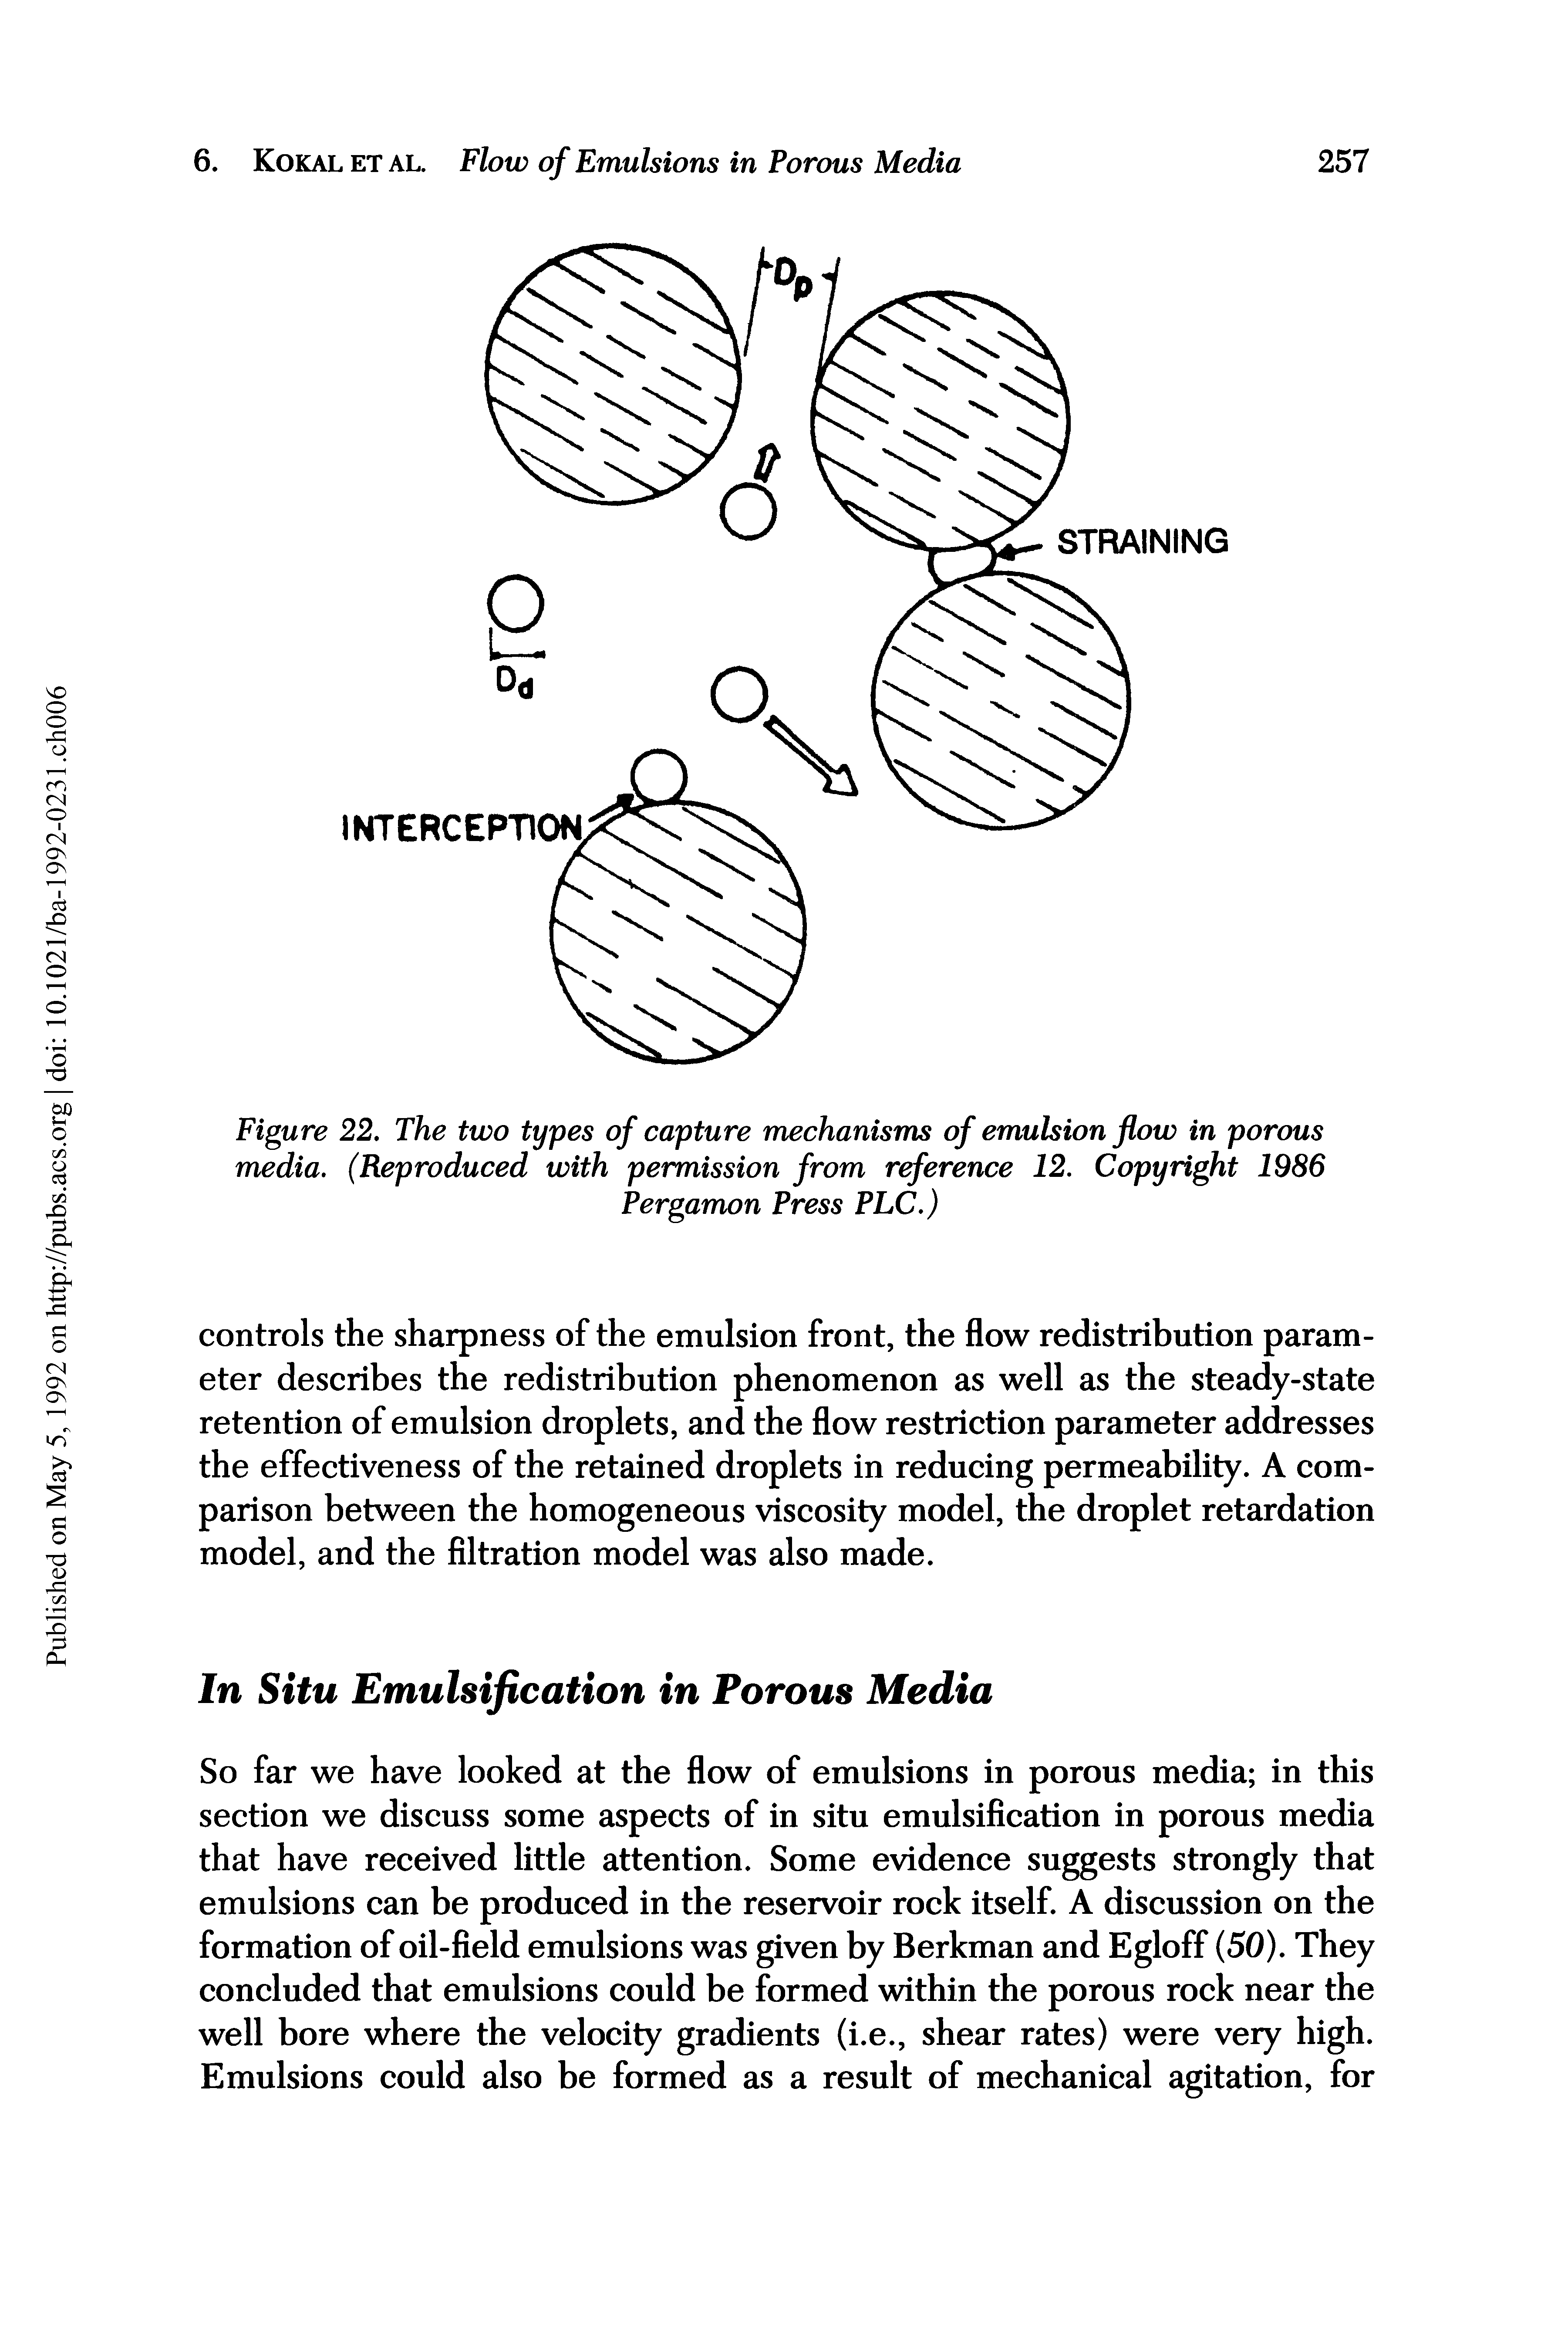 Figure 22. The two types of capture mechanisms of emulsion flow in porous media. (Reproduced with permission from reference 12. Copyright 1986 Pergamon Press PLC.)...